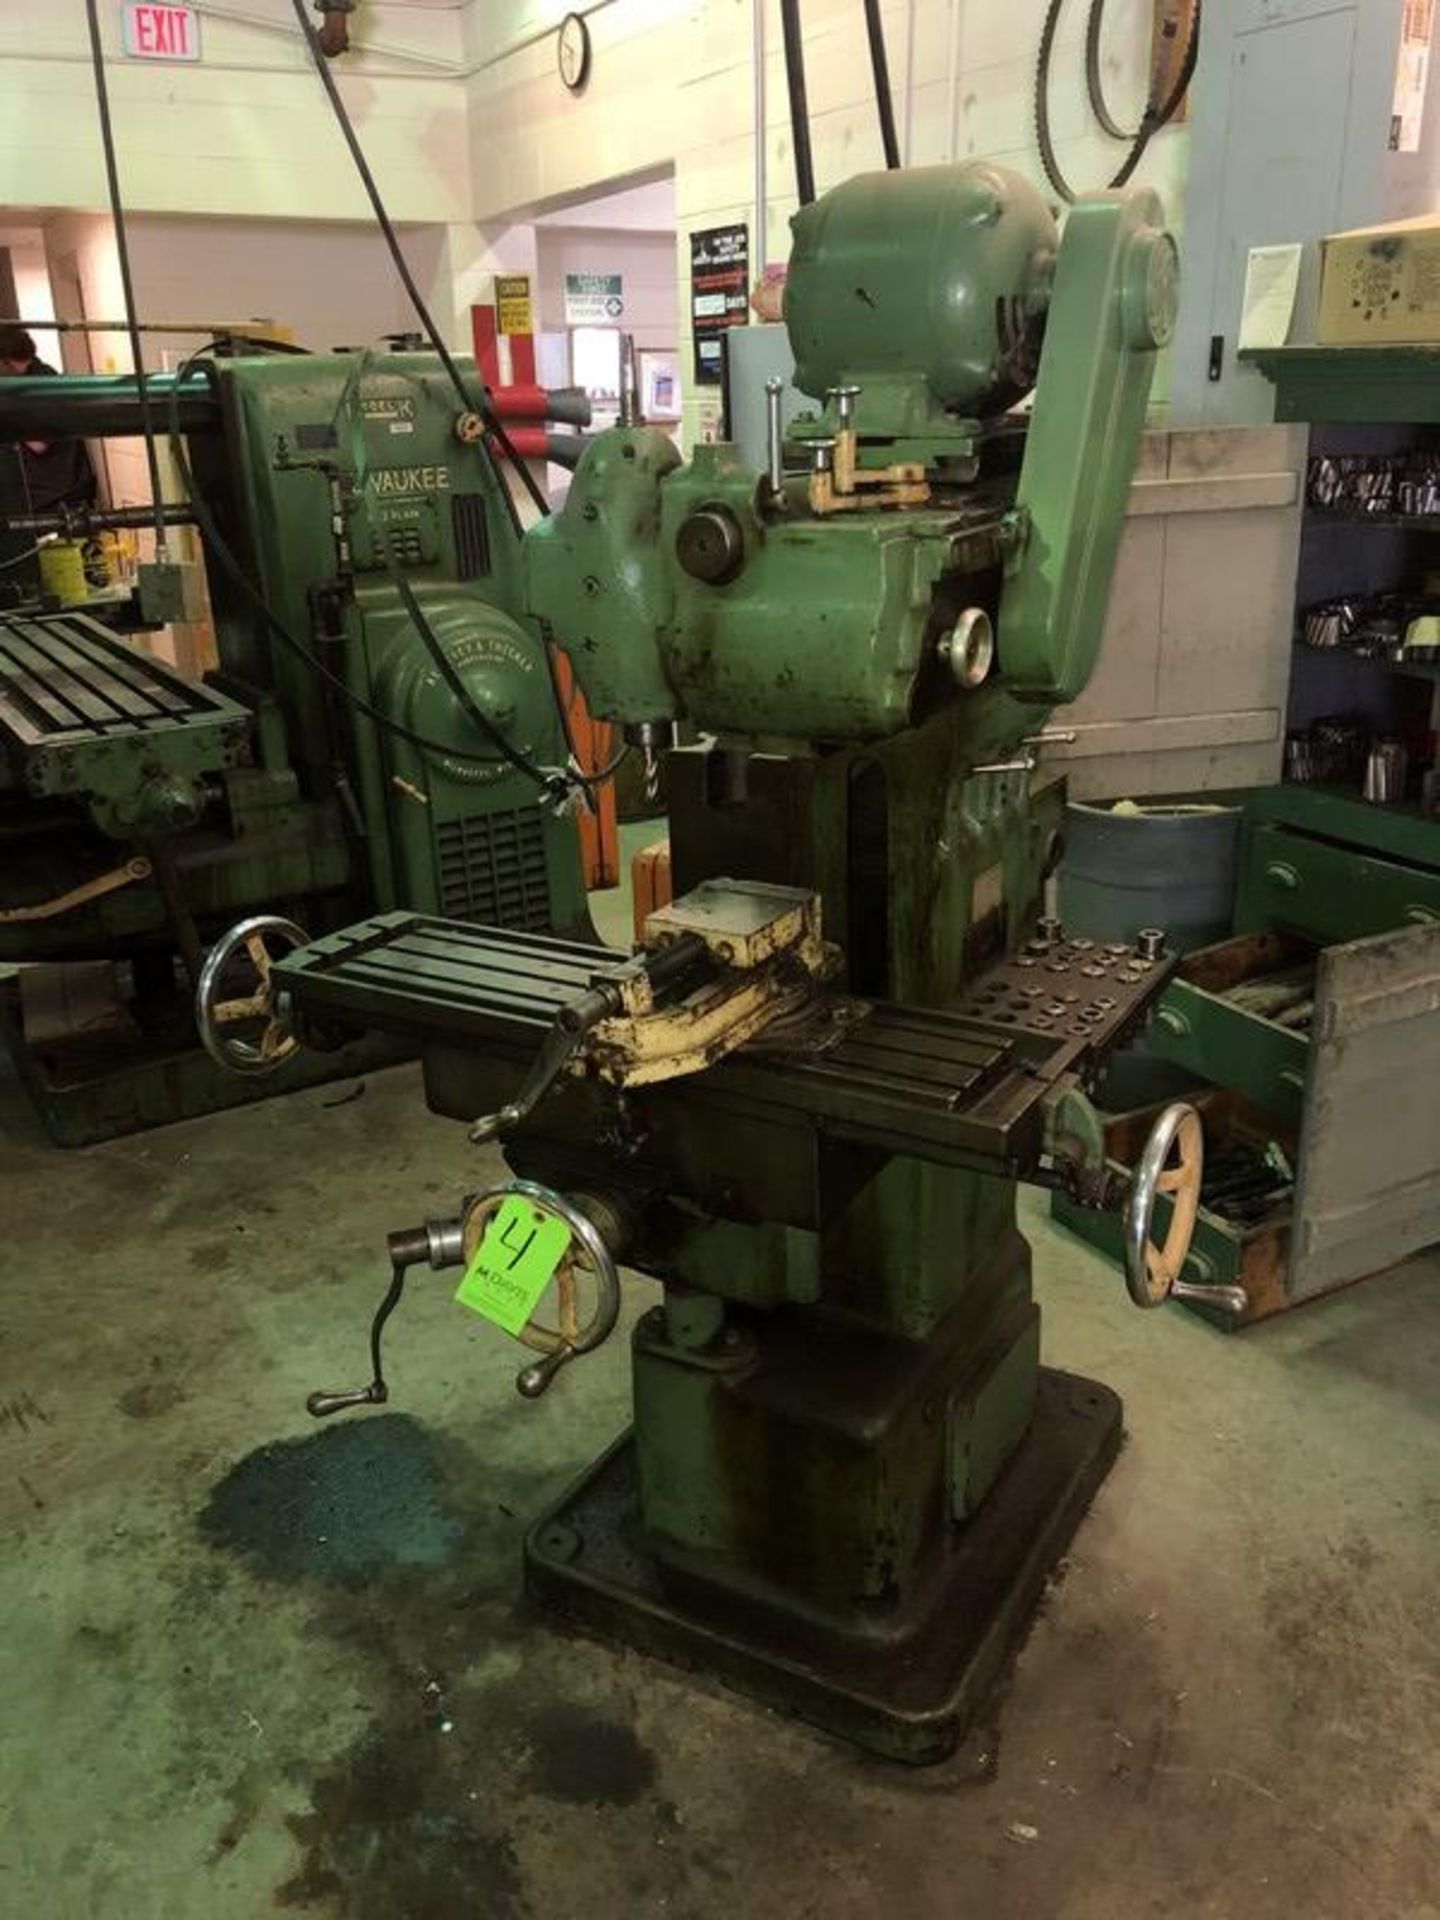 Van Norman Vertical Milling Machine, Model 12, S/N 9115, with 37-1/2" L x 19-1/2" W Adjustable Table - Image 2 of 6